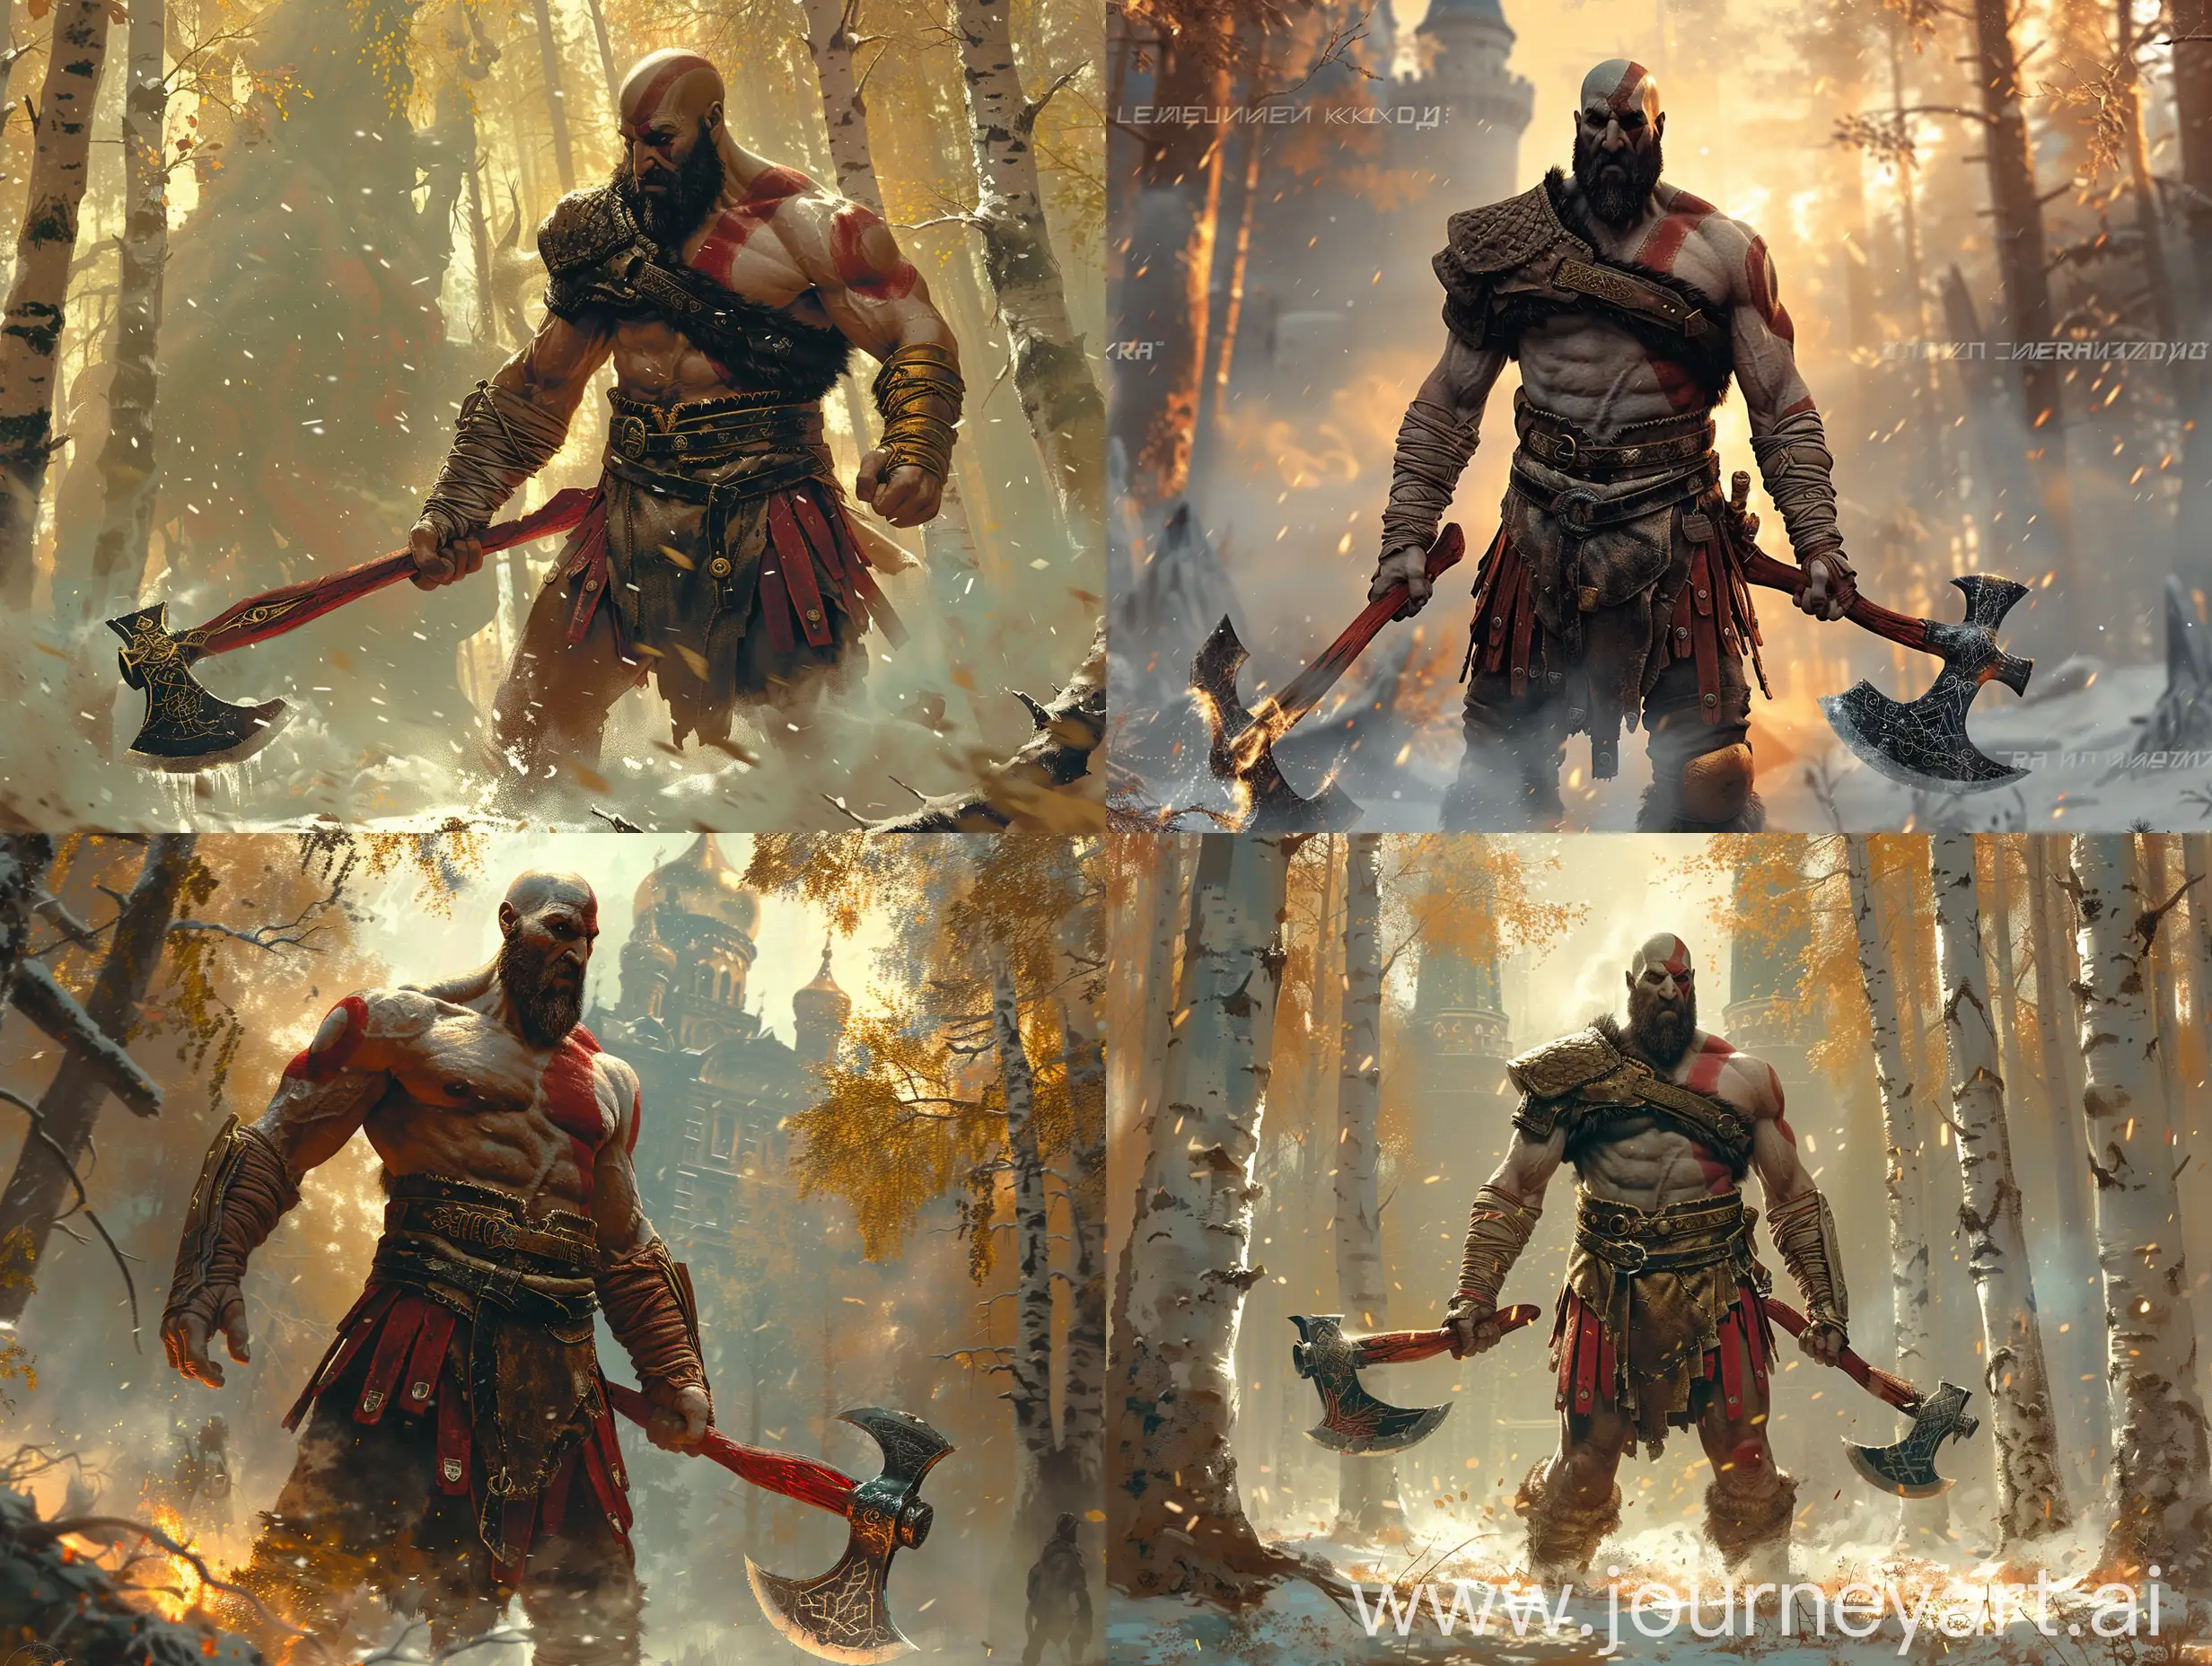 Kratos-Confronts-the-ThreeHeaded-Zmey-Gorynych-in-a-Russian-Mythical-Battle